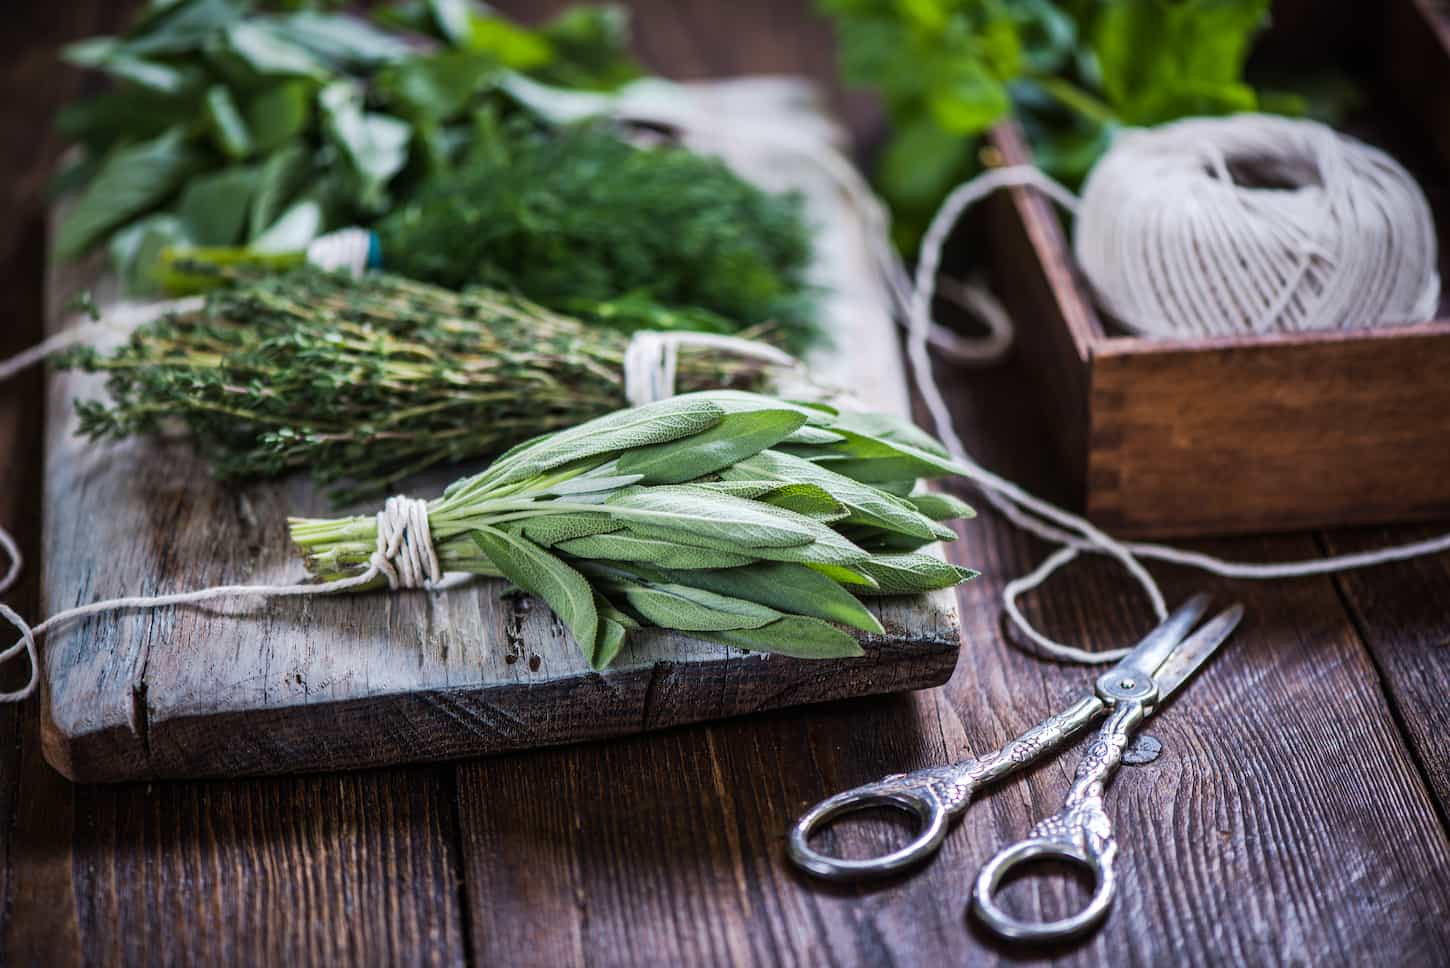 An image of basil, sage, dill, and thyme herbs on a wooden board preparing for winter drying.